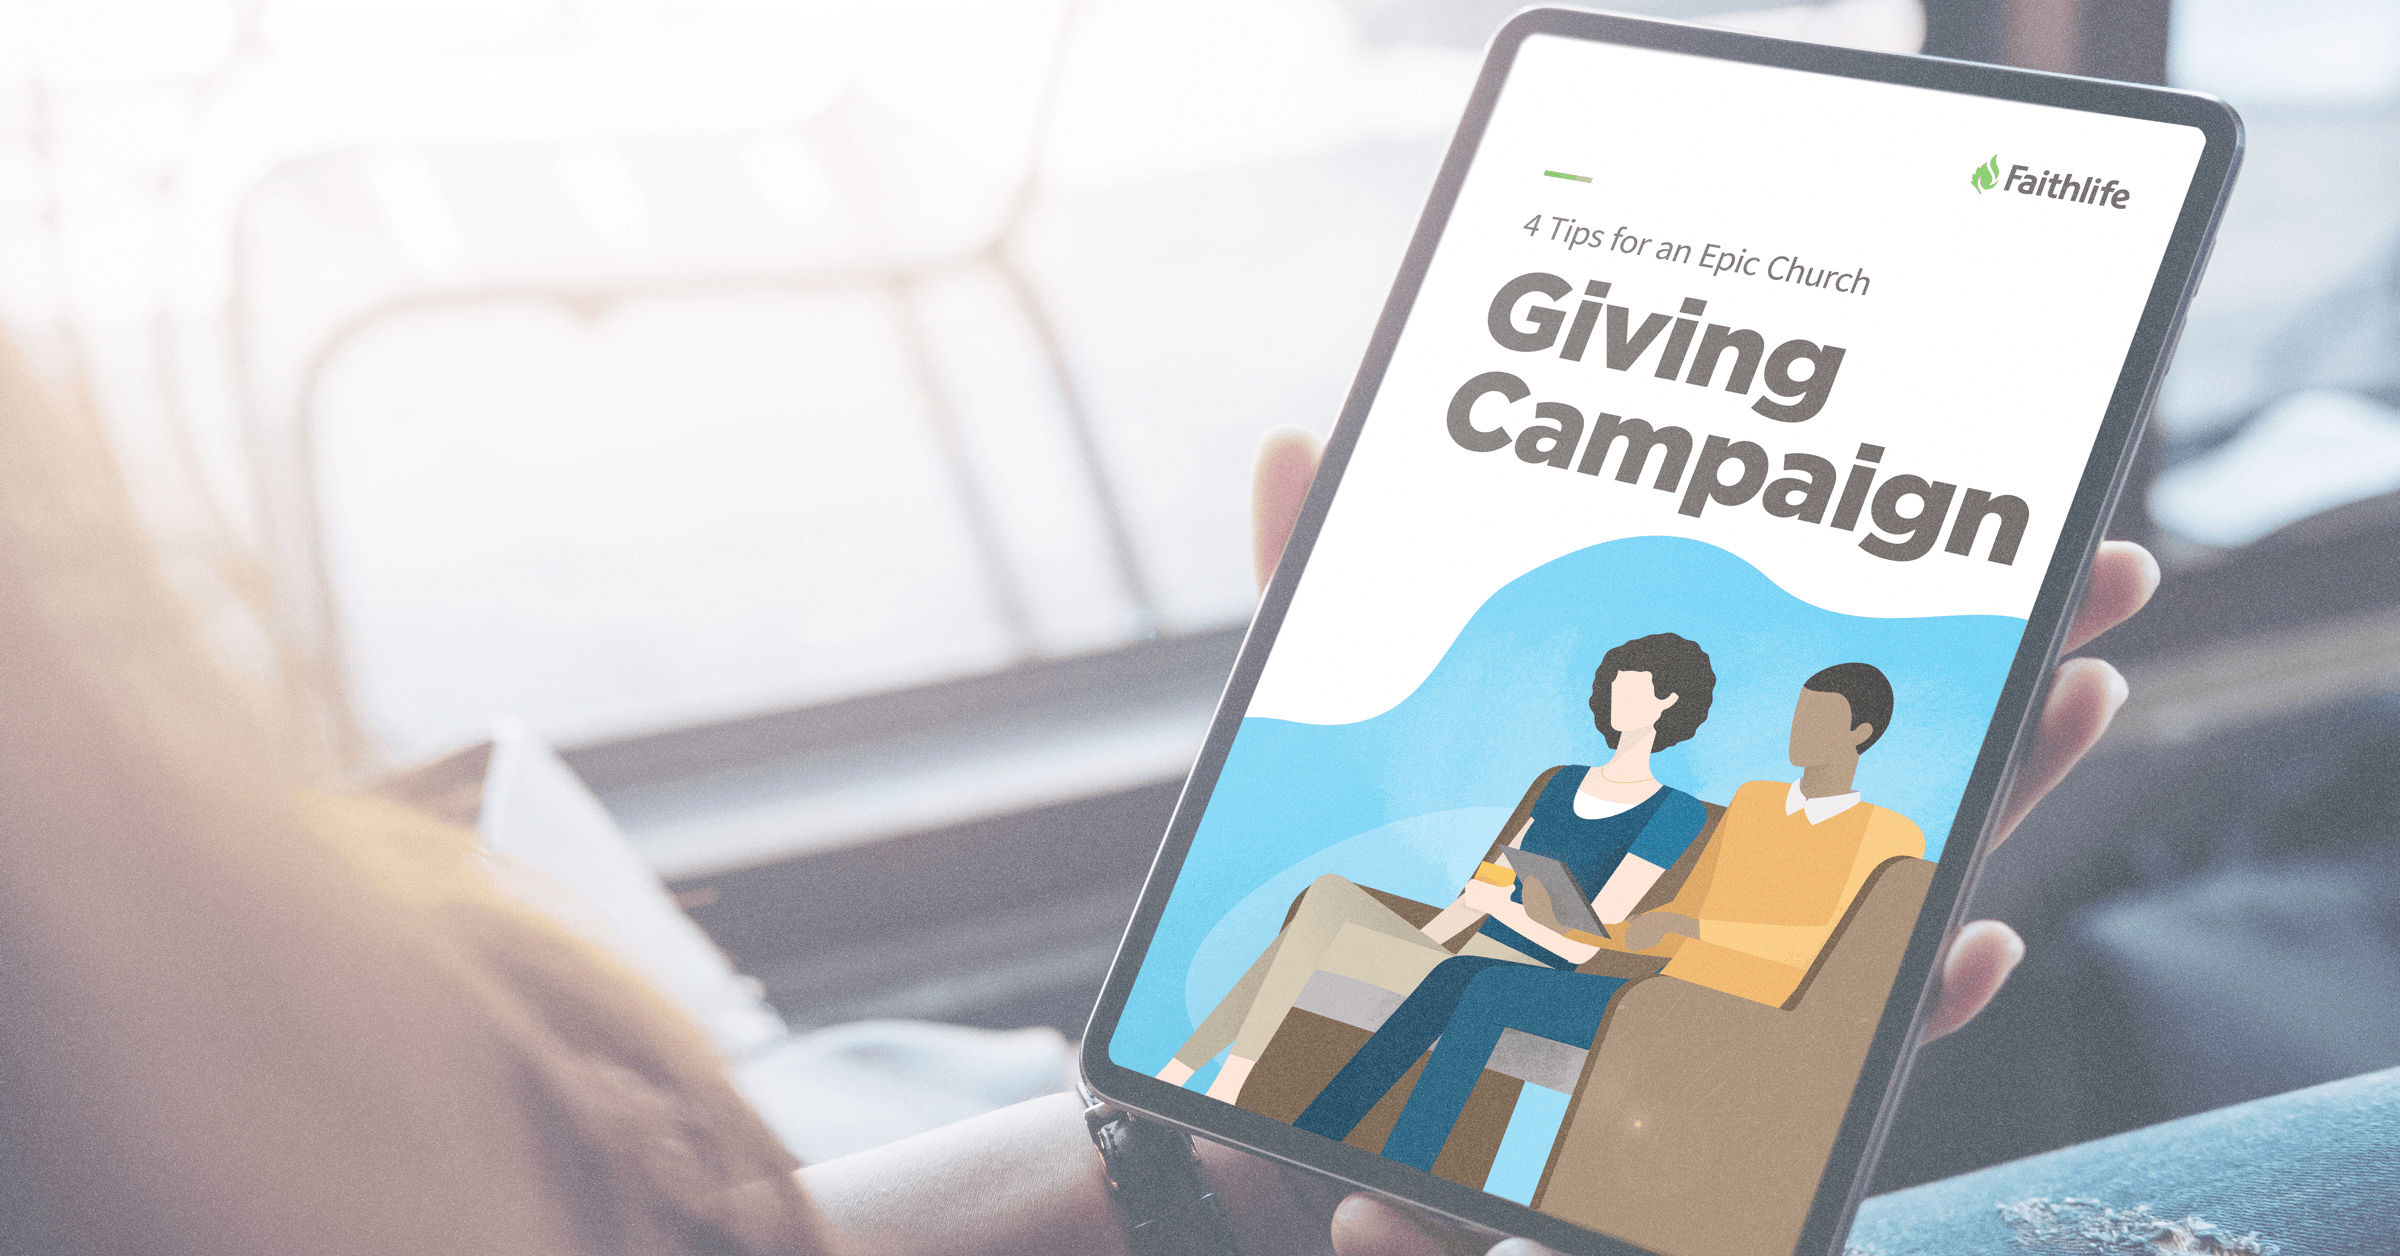 4 Tips for an Epic Church Giving Campaign